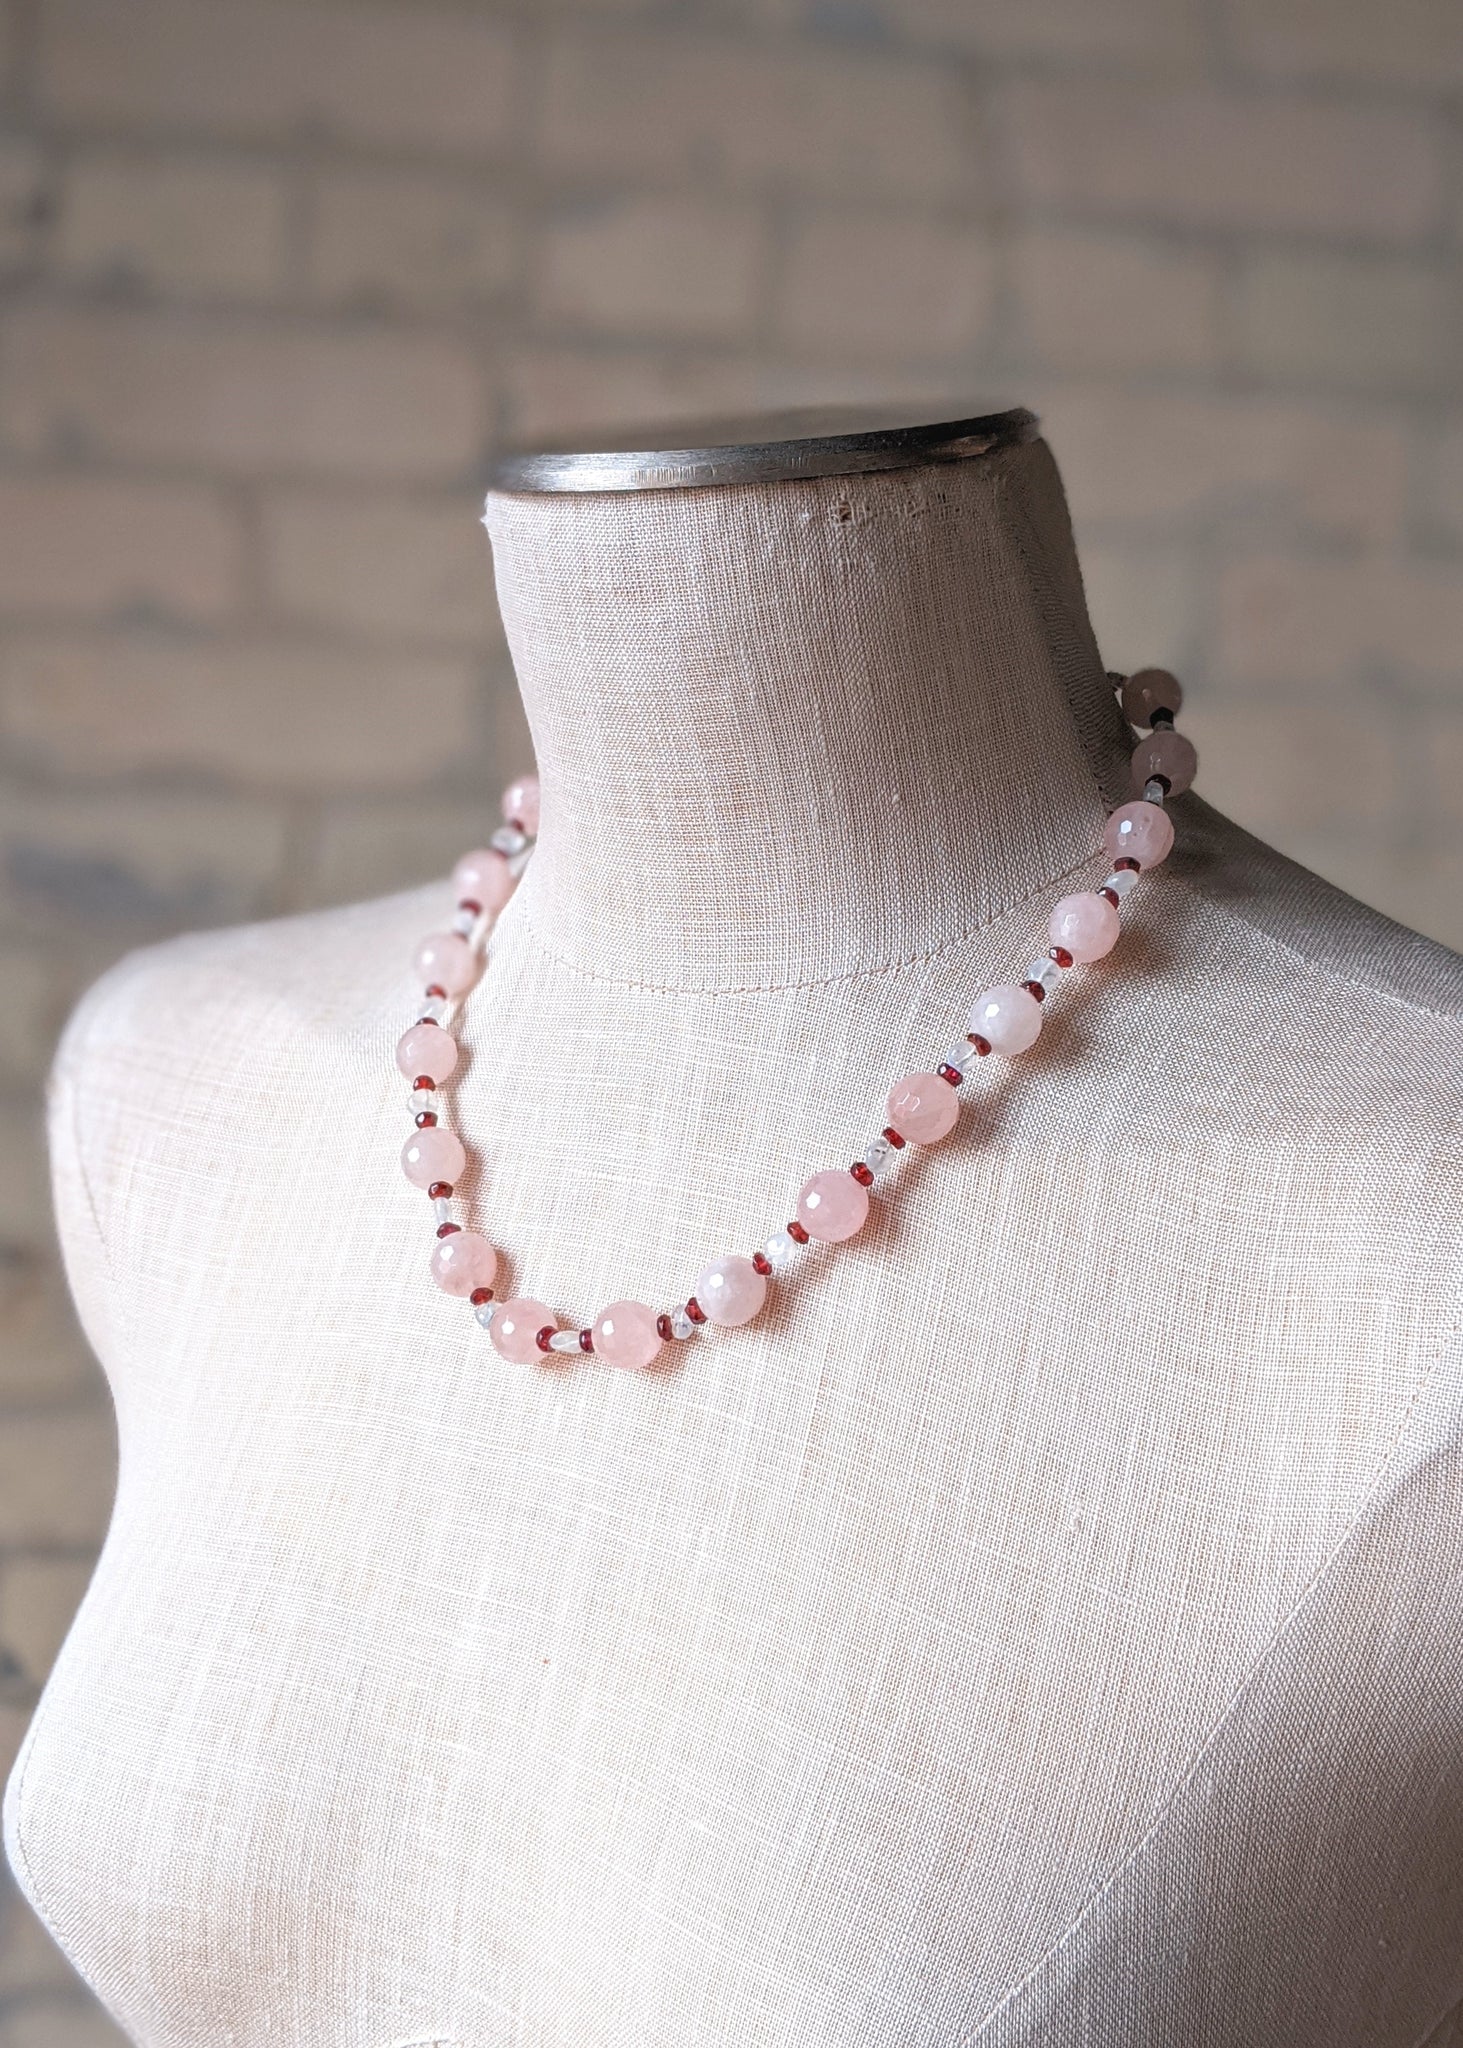 Rose Quartz Necklace with Clear & Ruby Spacers - Handmade Organic Clothing